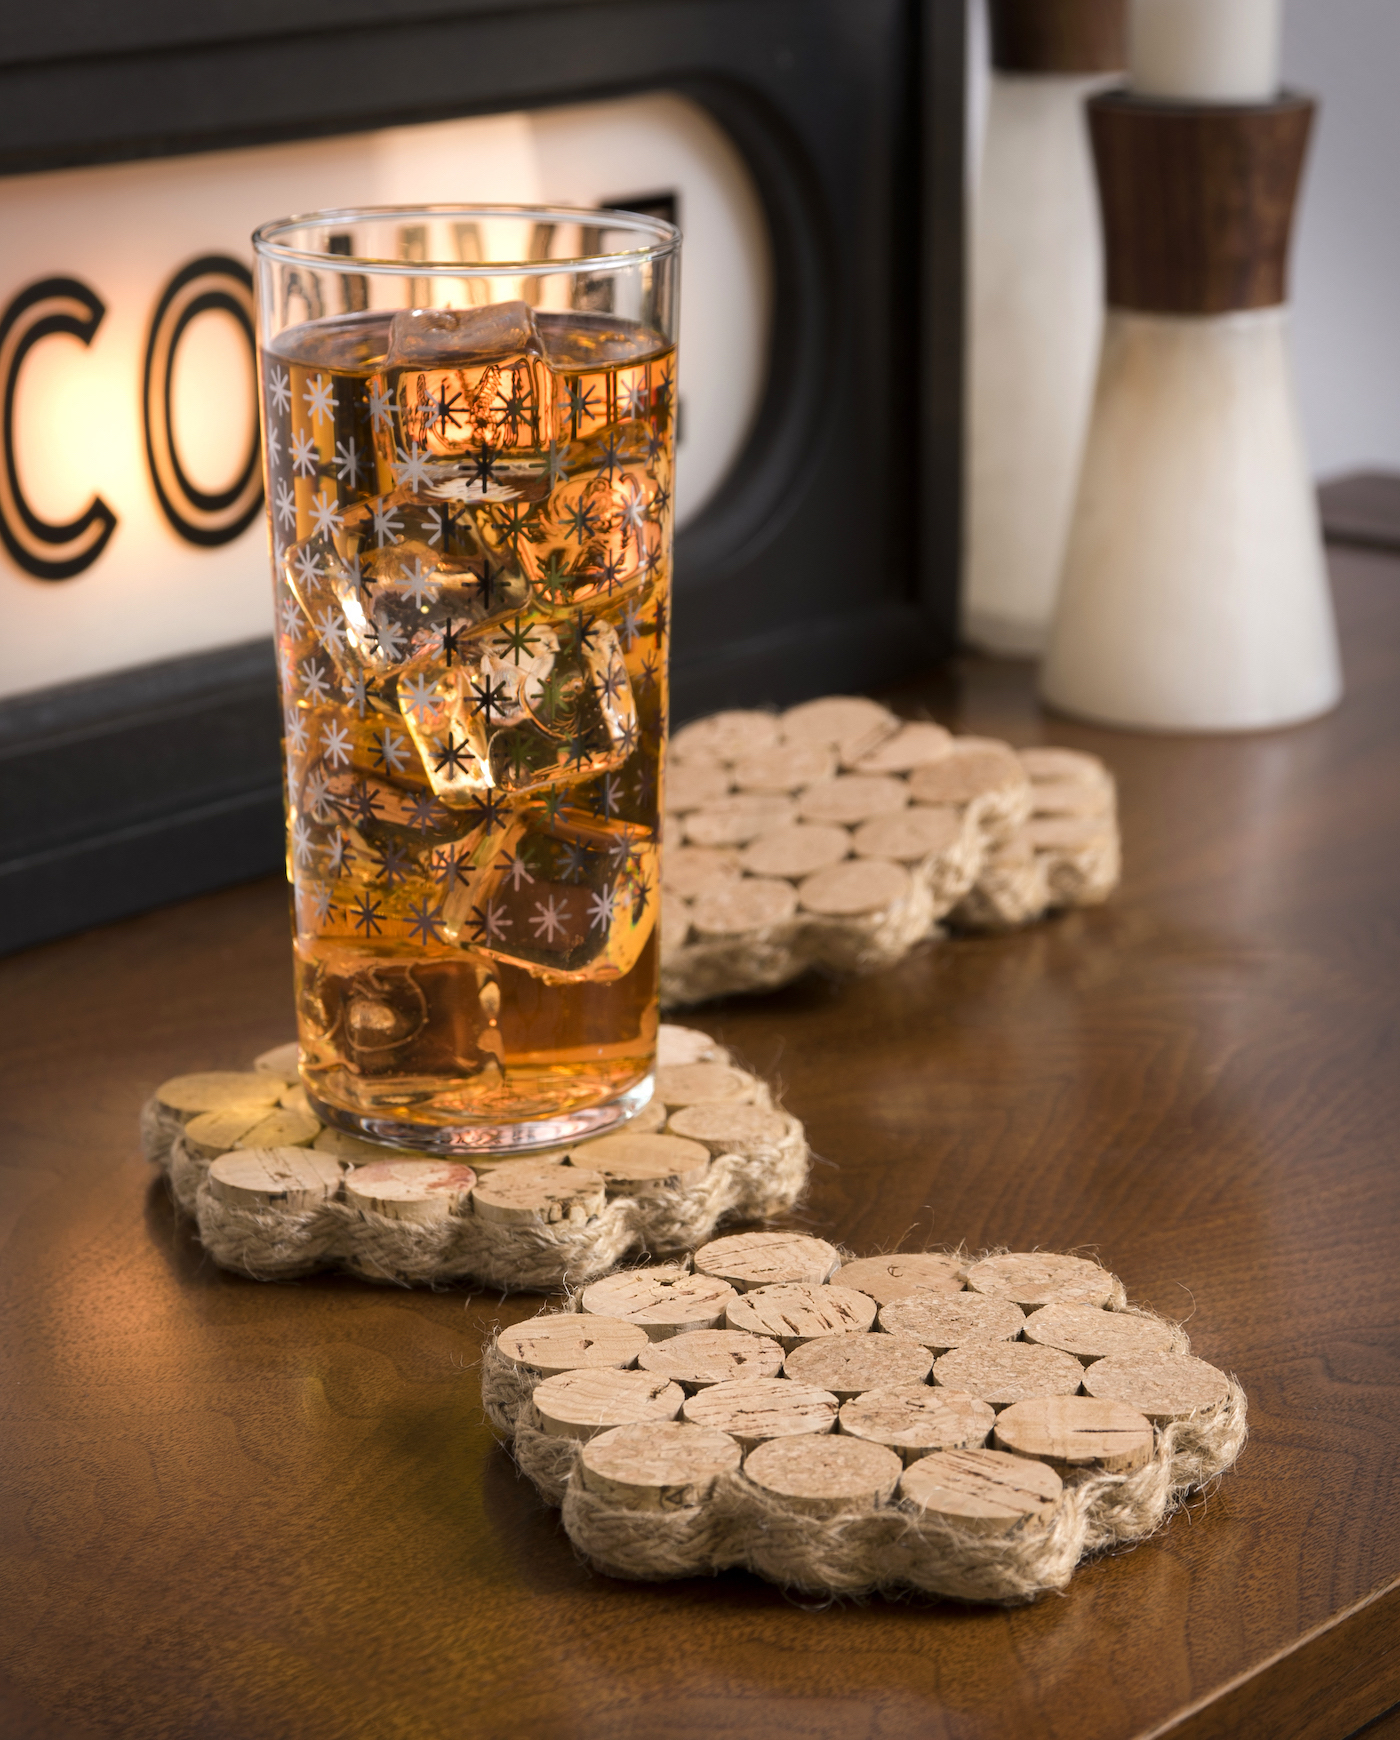 Coasters made from wine corks